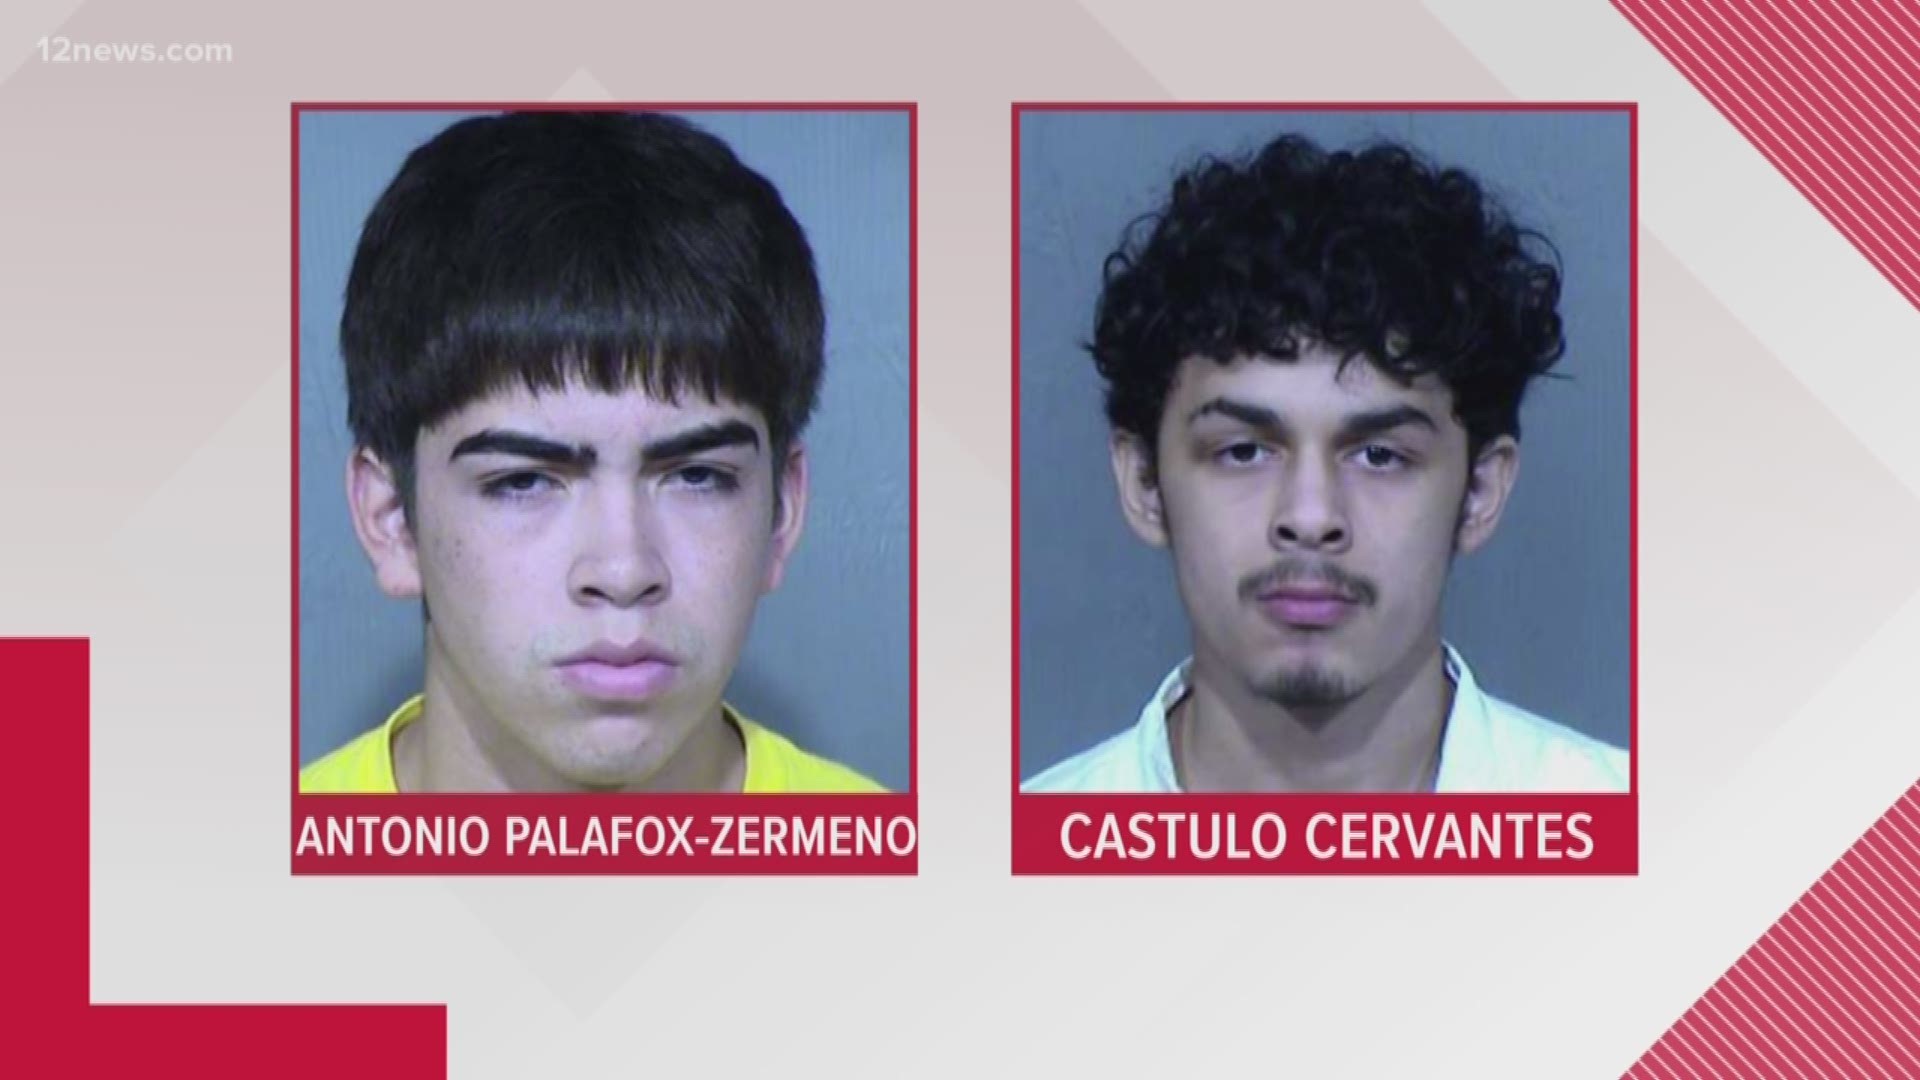 Phoenix police say officers have arrested two teenagers in connection to the shooting deaths of two men near a Jobot Coffee in Downtown Phoenix last year. Authorities say Antonio Palafox-Zermeno and Castulo Cervantes shot the two men near Third Avenue and Roosevelt. Police say they think there are at least two more suspects involved.